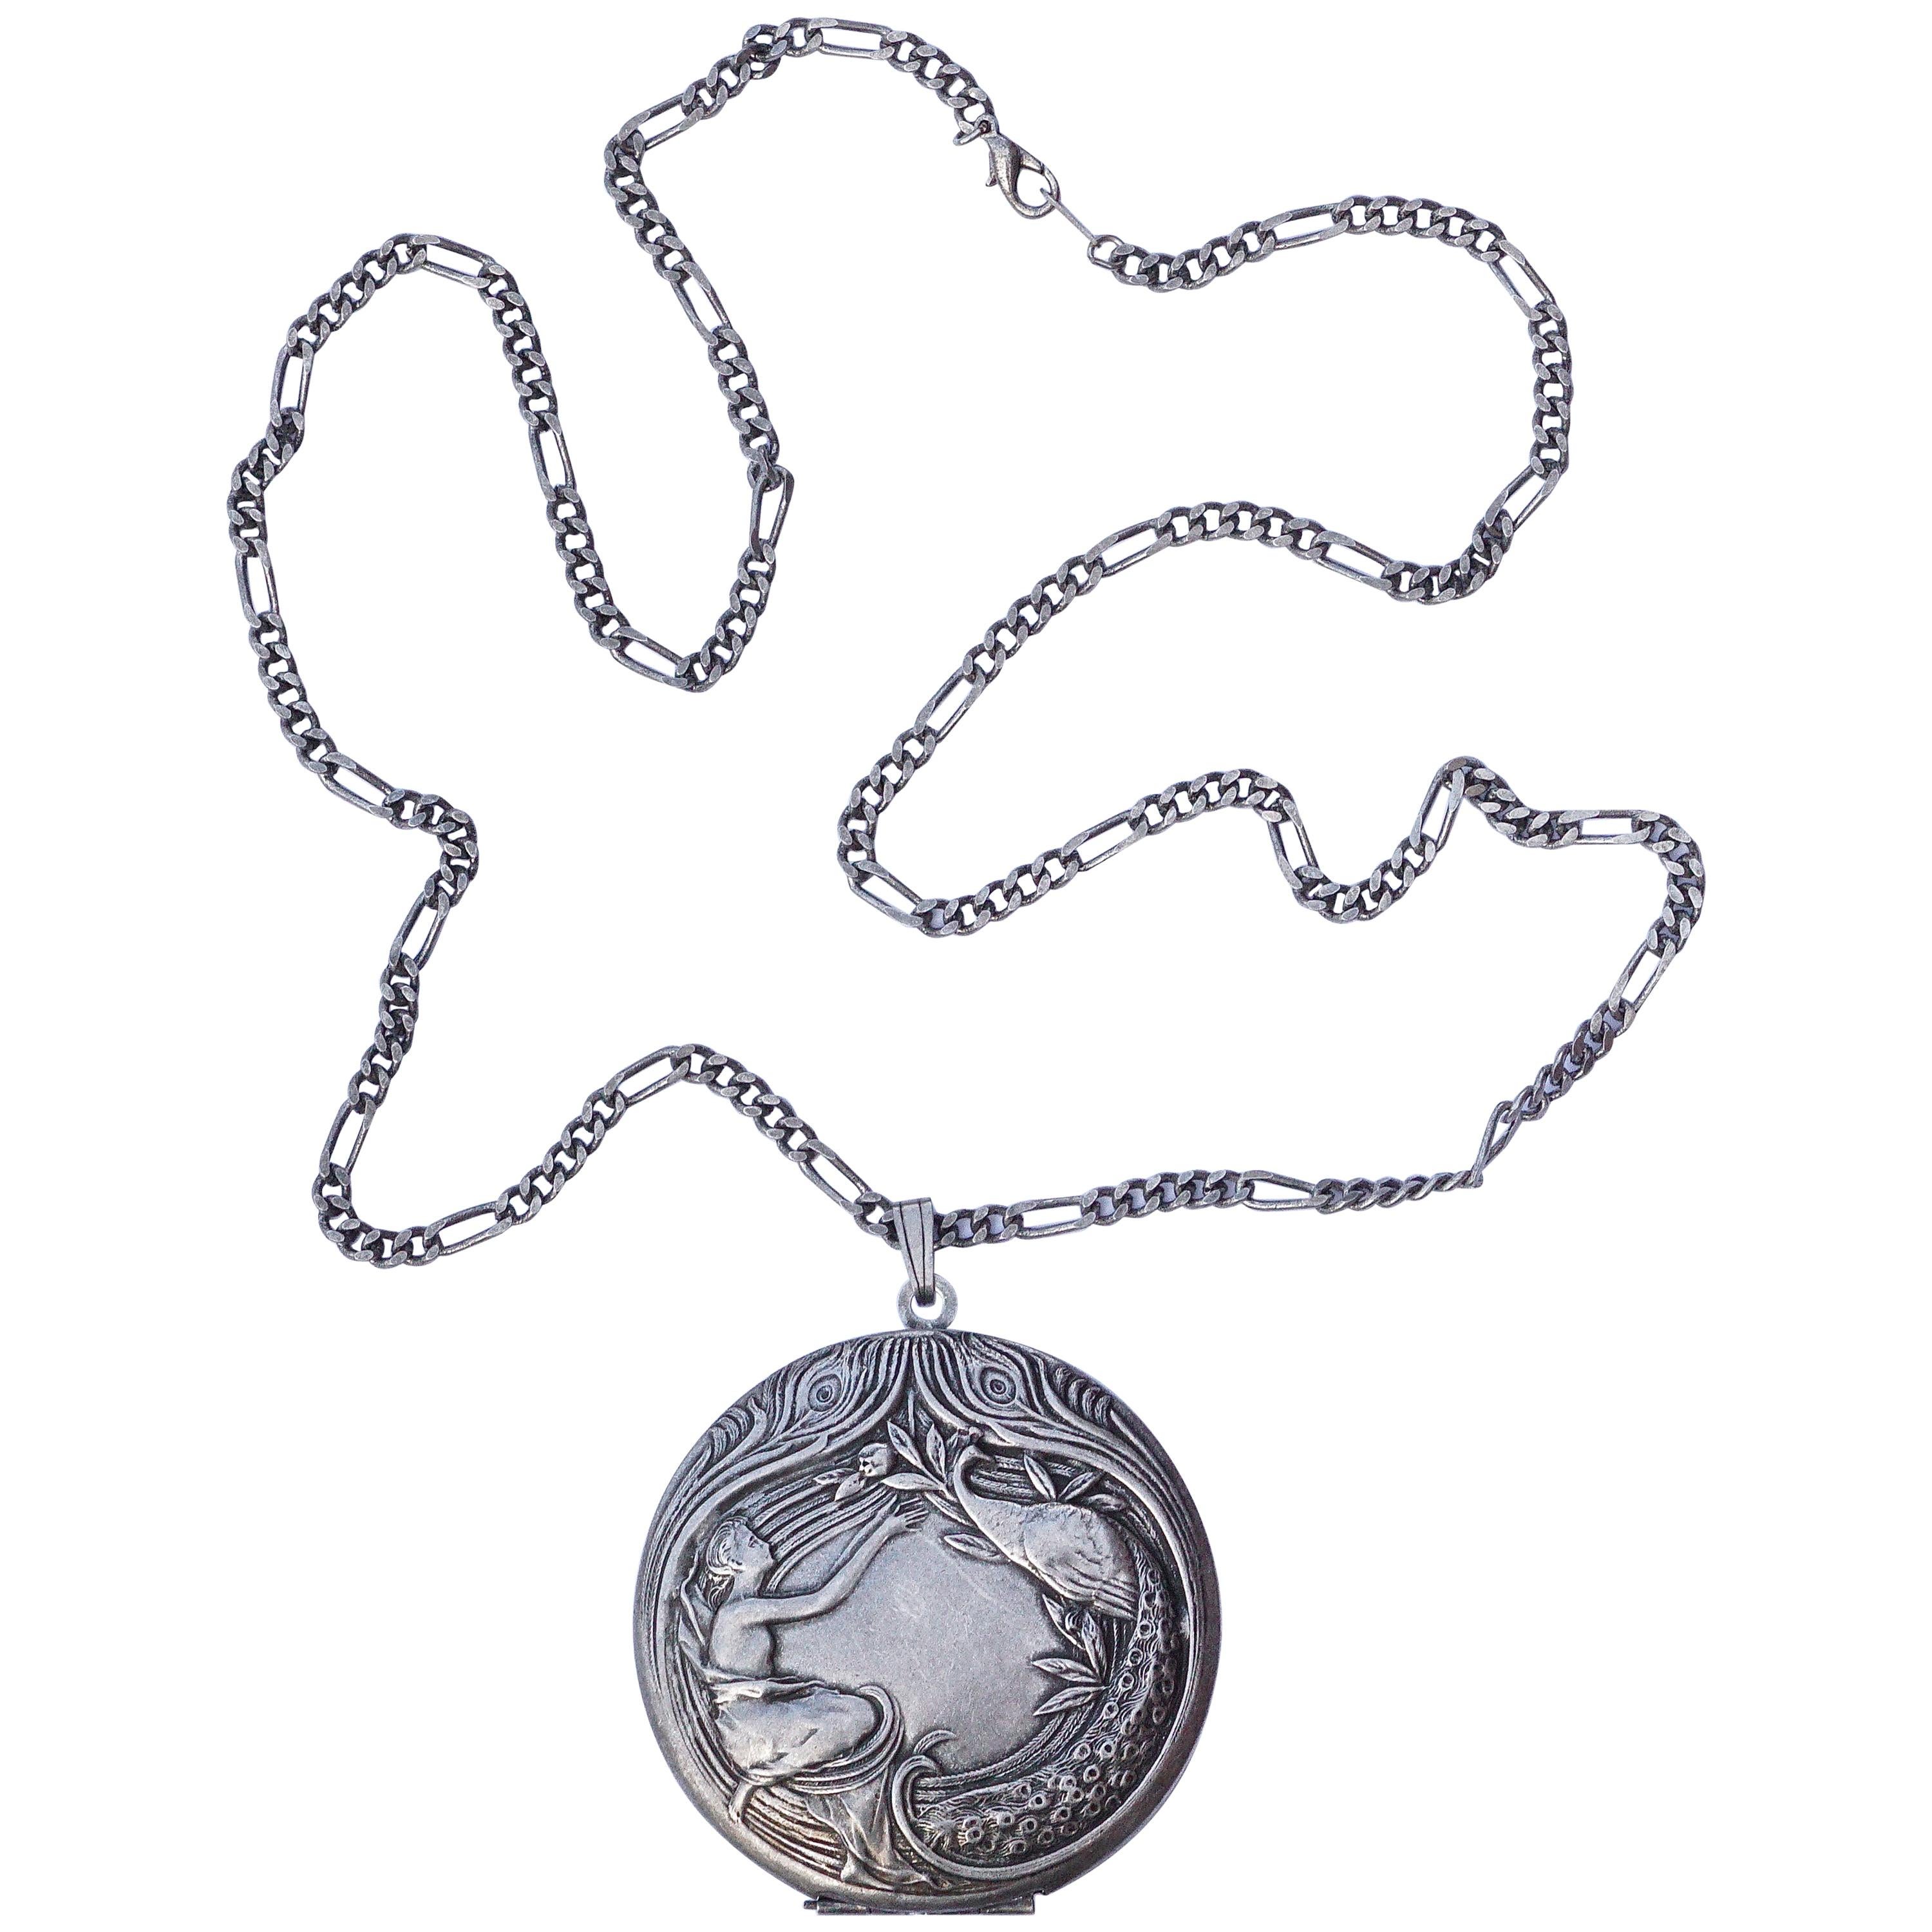 French Pierre Bex Art Nouveau style Silver Plated Necklace and Peacock Locket